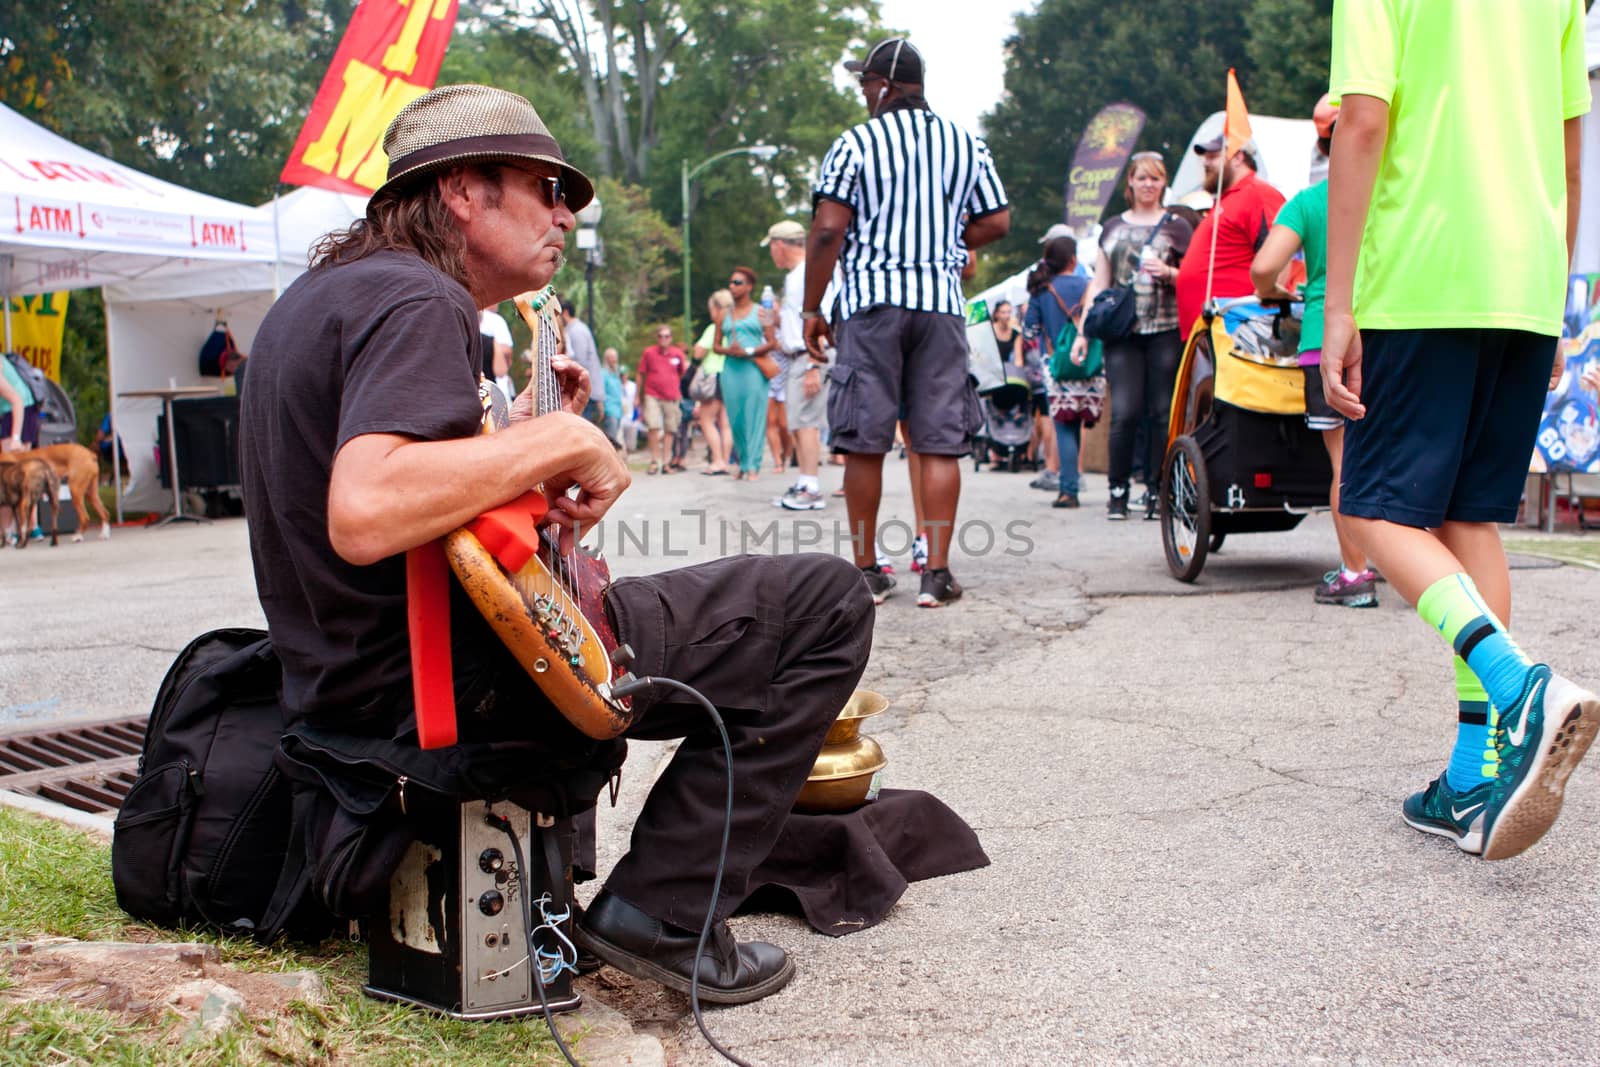 Man Strums Bass Guitar For Tips At Arts Festival by BluIz60